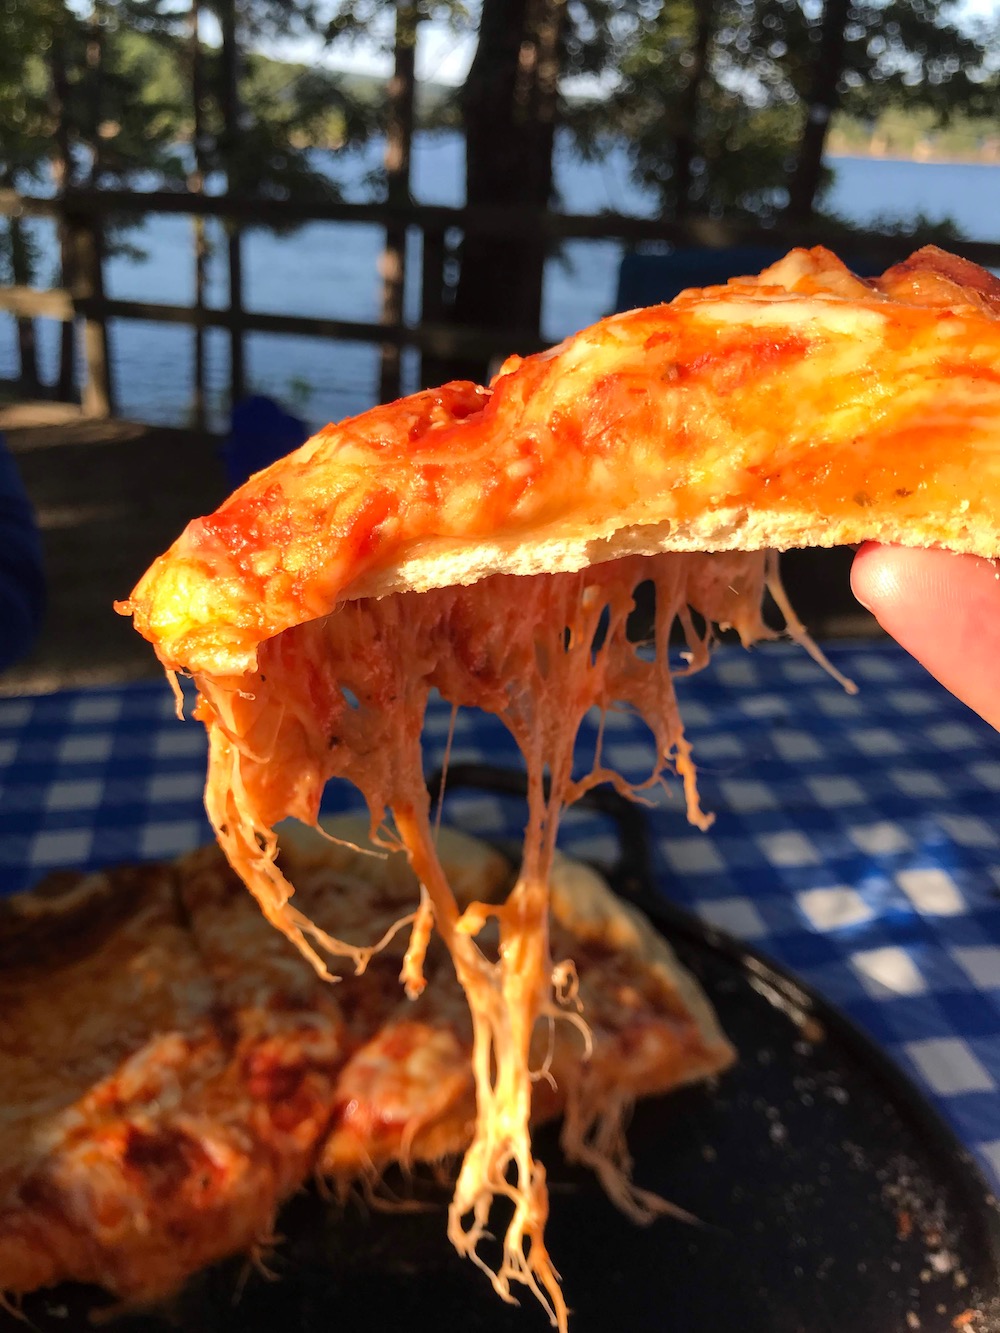 Yummy pizza over a campfire.